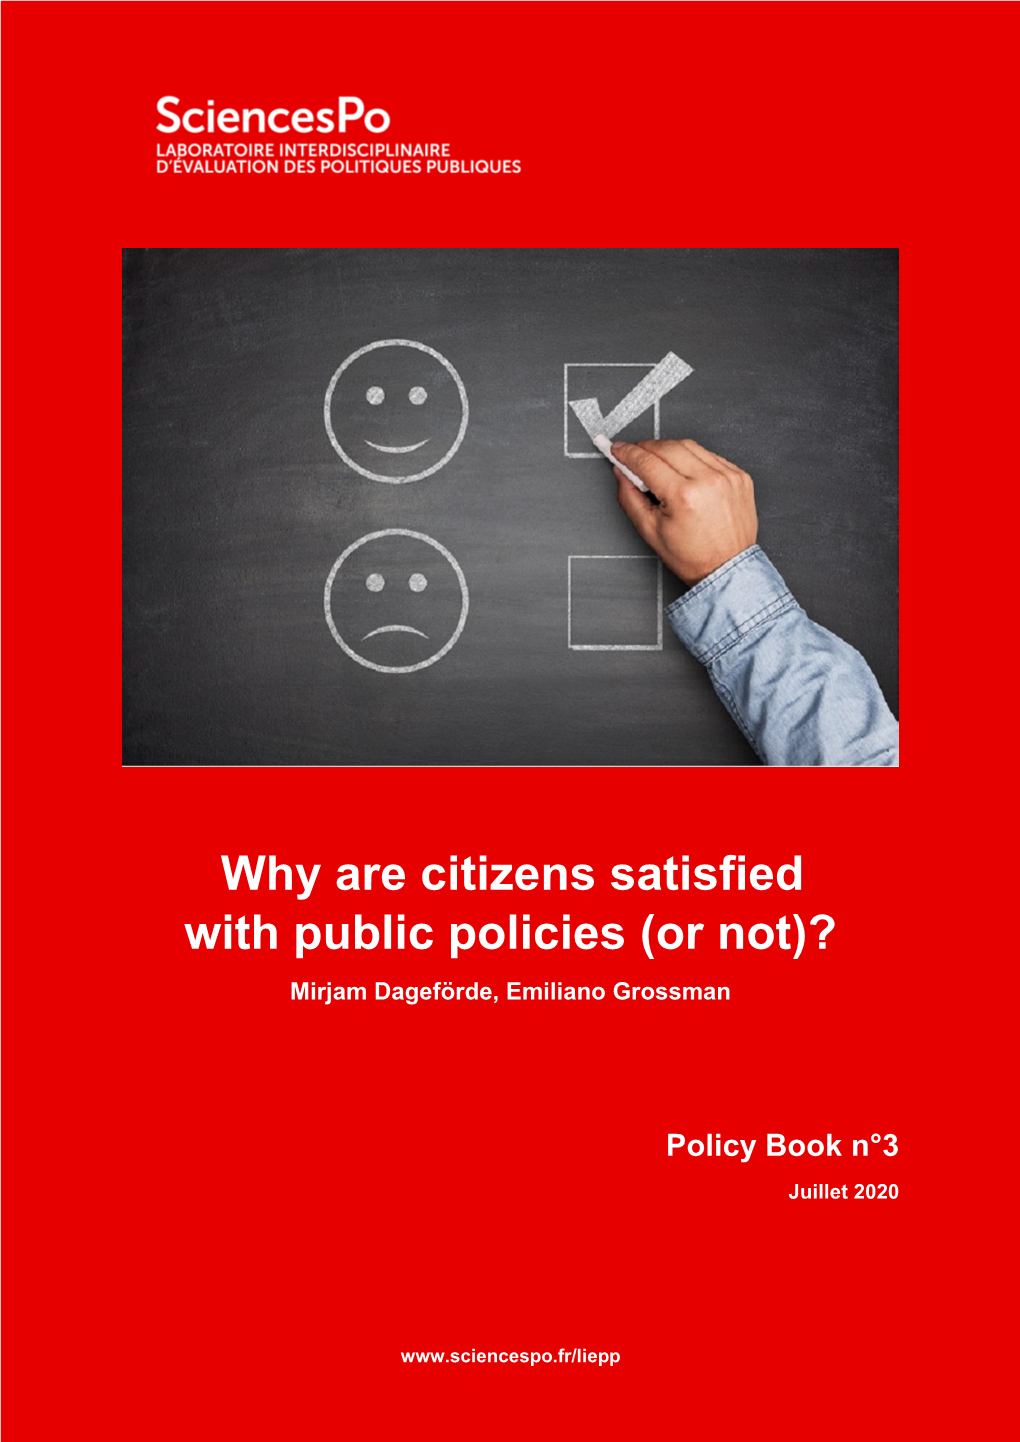 Why Are Citizens Satisfied with Public Policies (Or Not)? Mirjam Dageförde, Emiliano Grossman